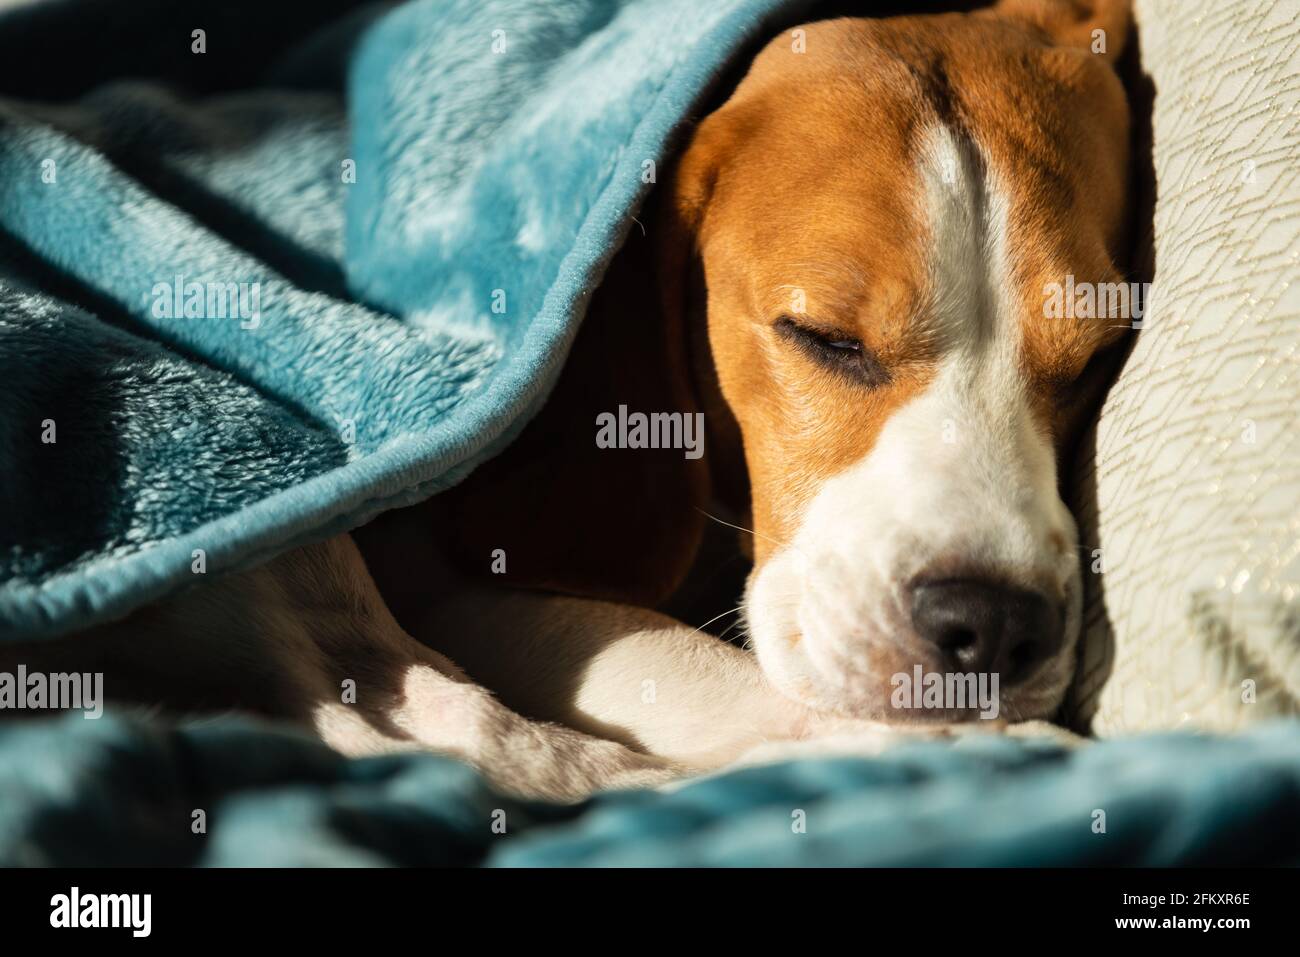 Lazy and sleepy beagle dog under a blue blanket on a bed. Sunny day at home background. Stock Photo